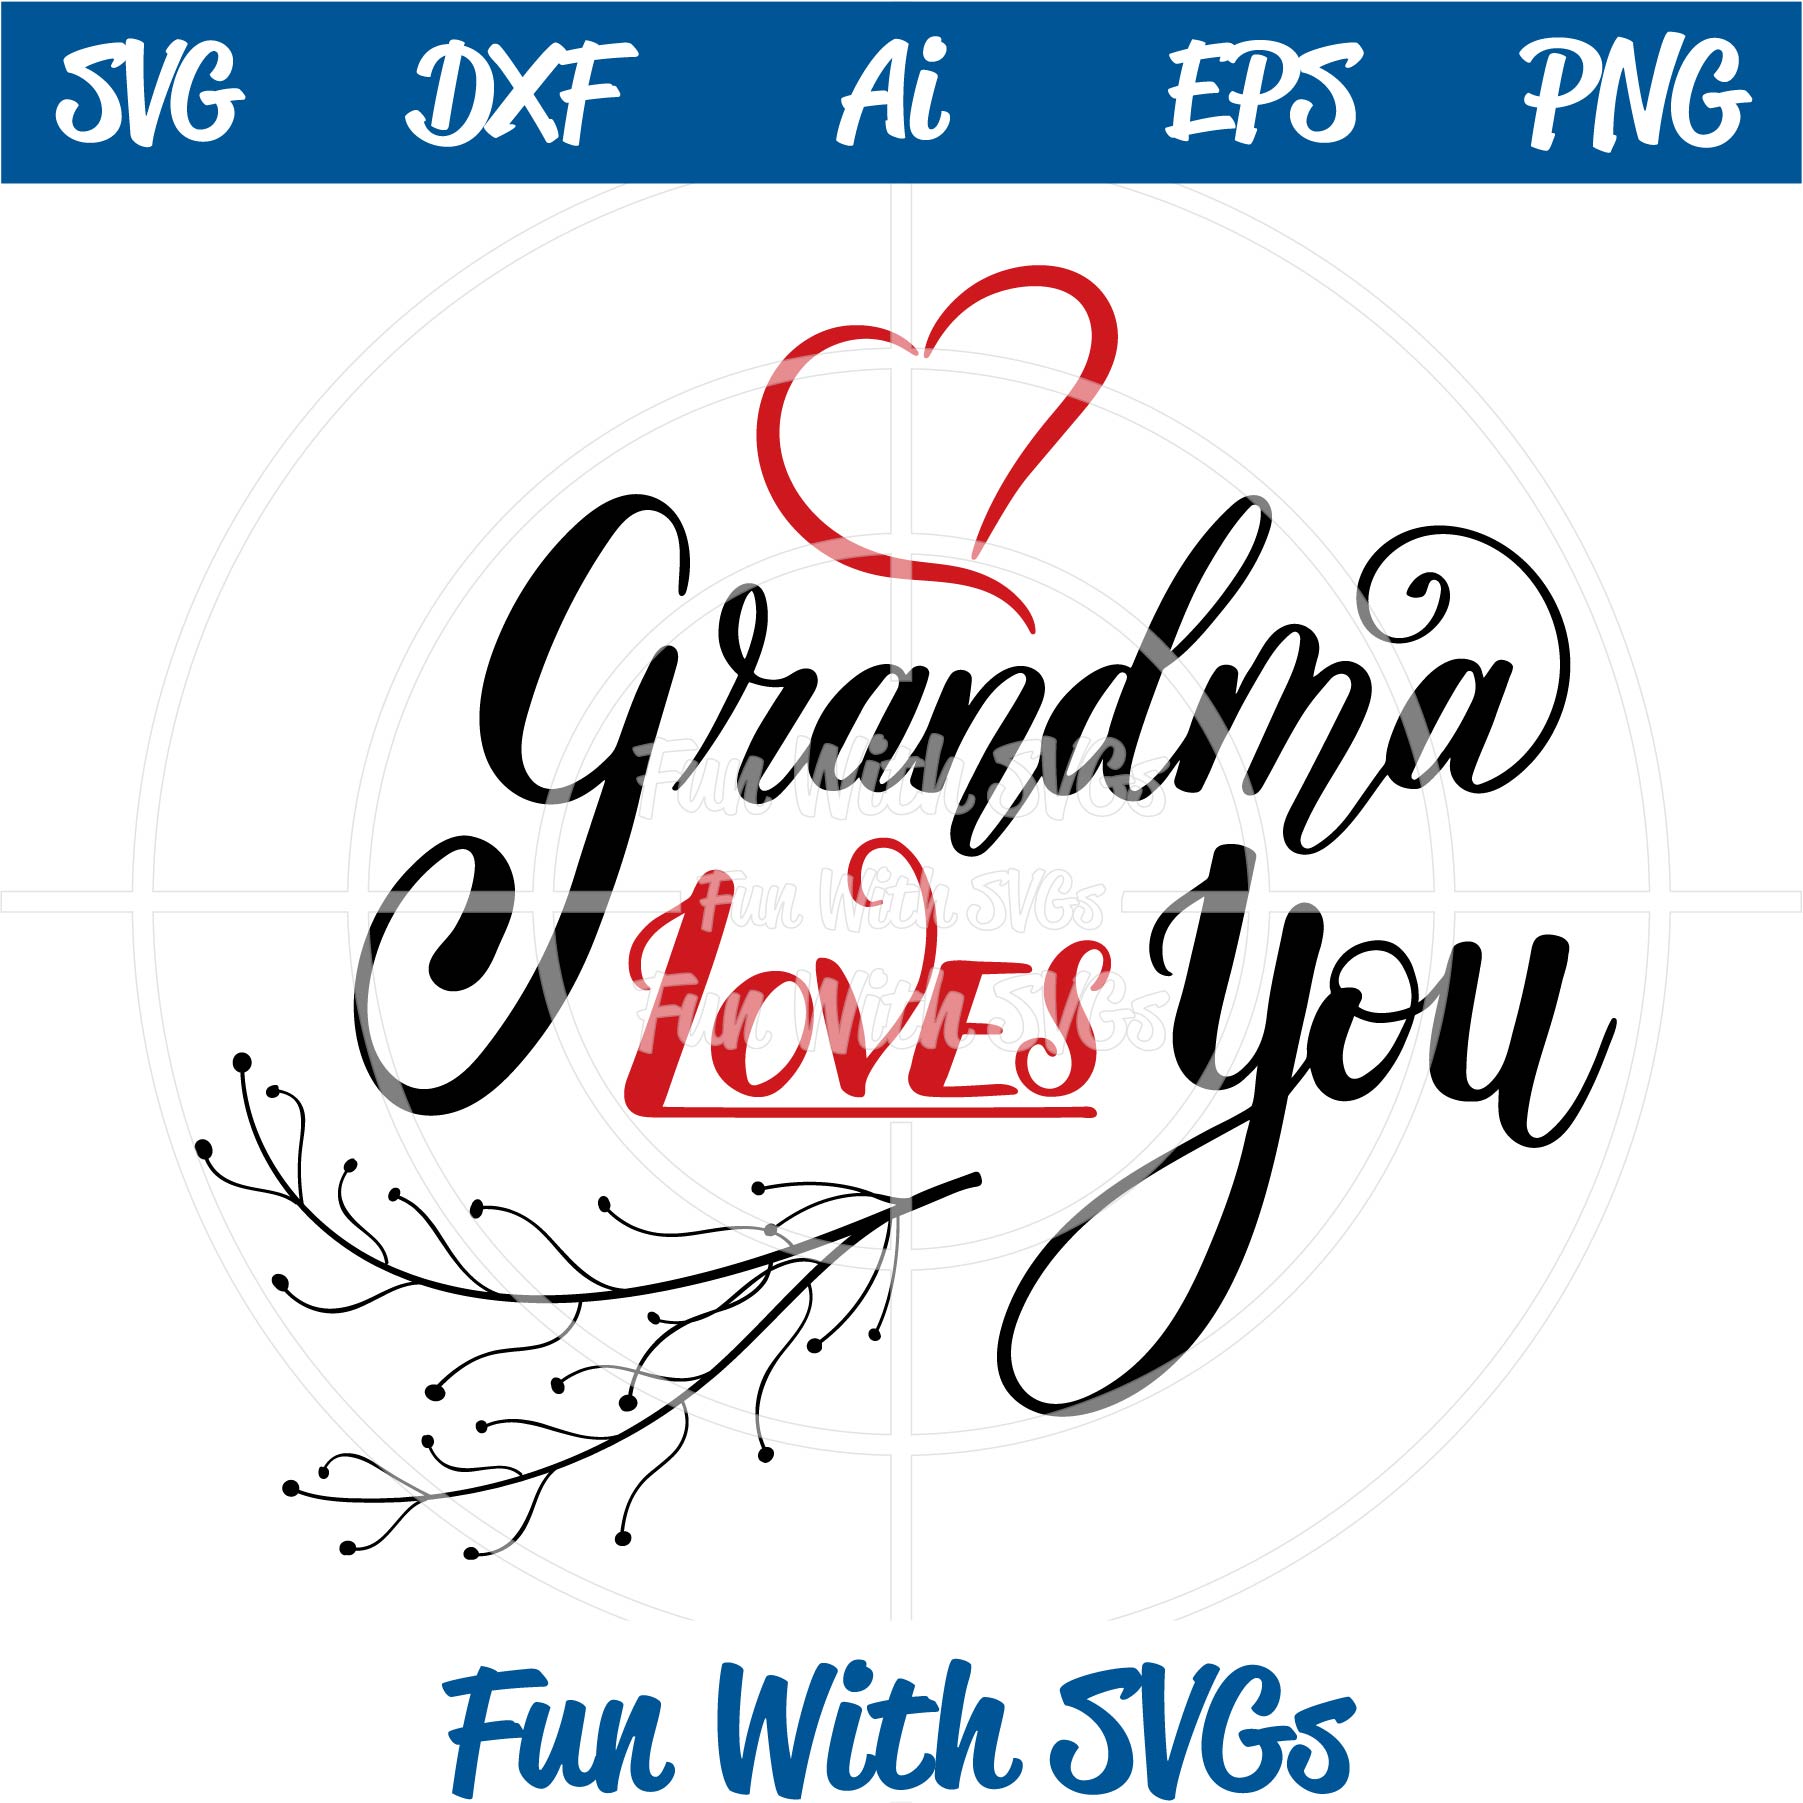 Download Grandma Loves You Svg Cutting File Inspirational Svgs Fun With Svgs